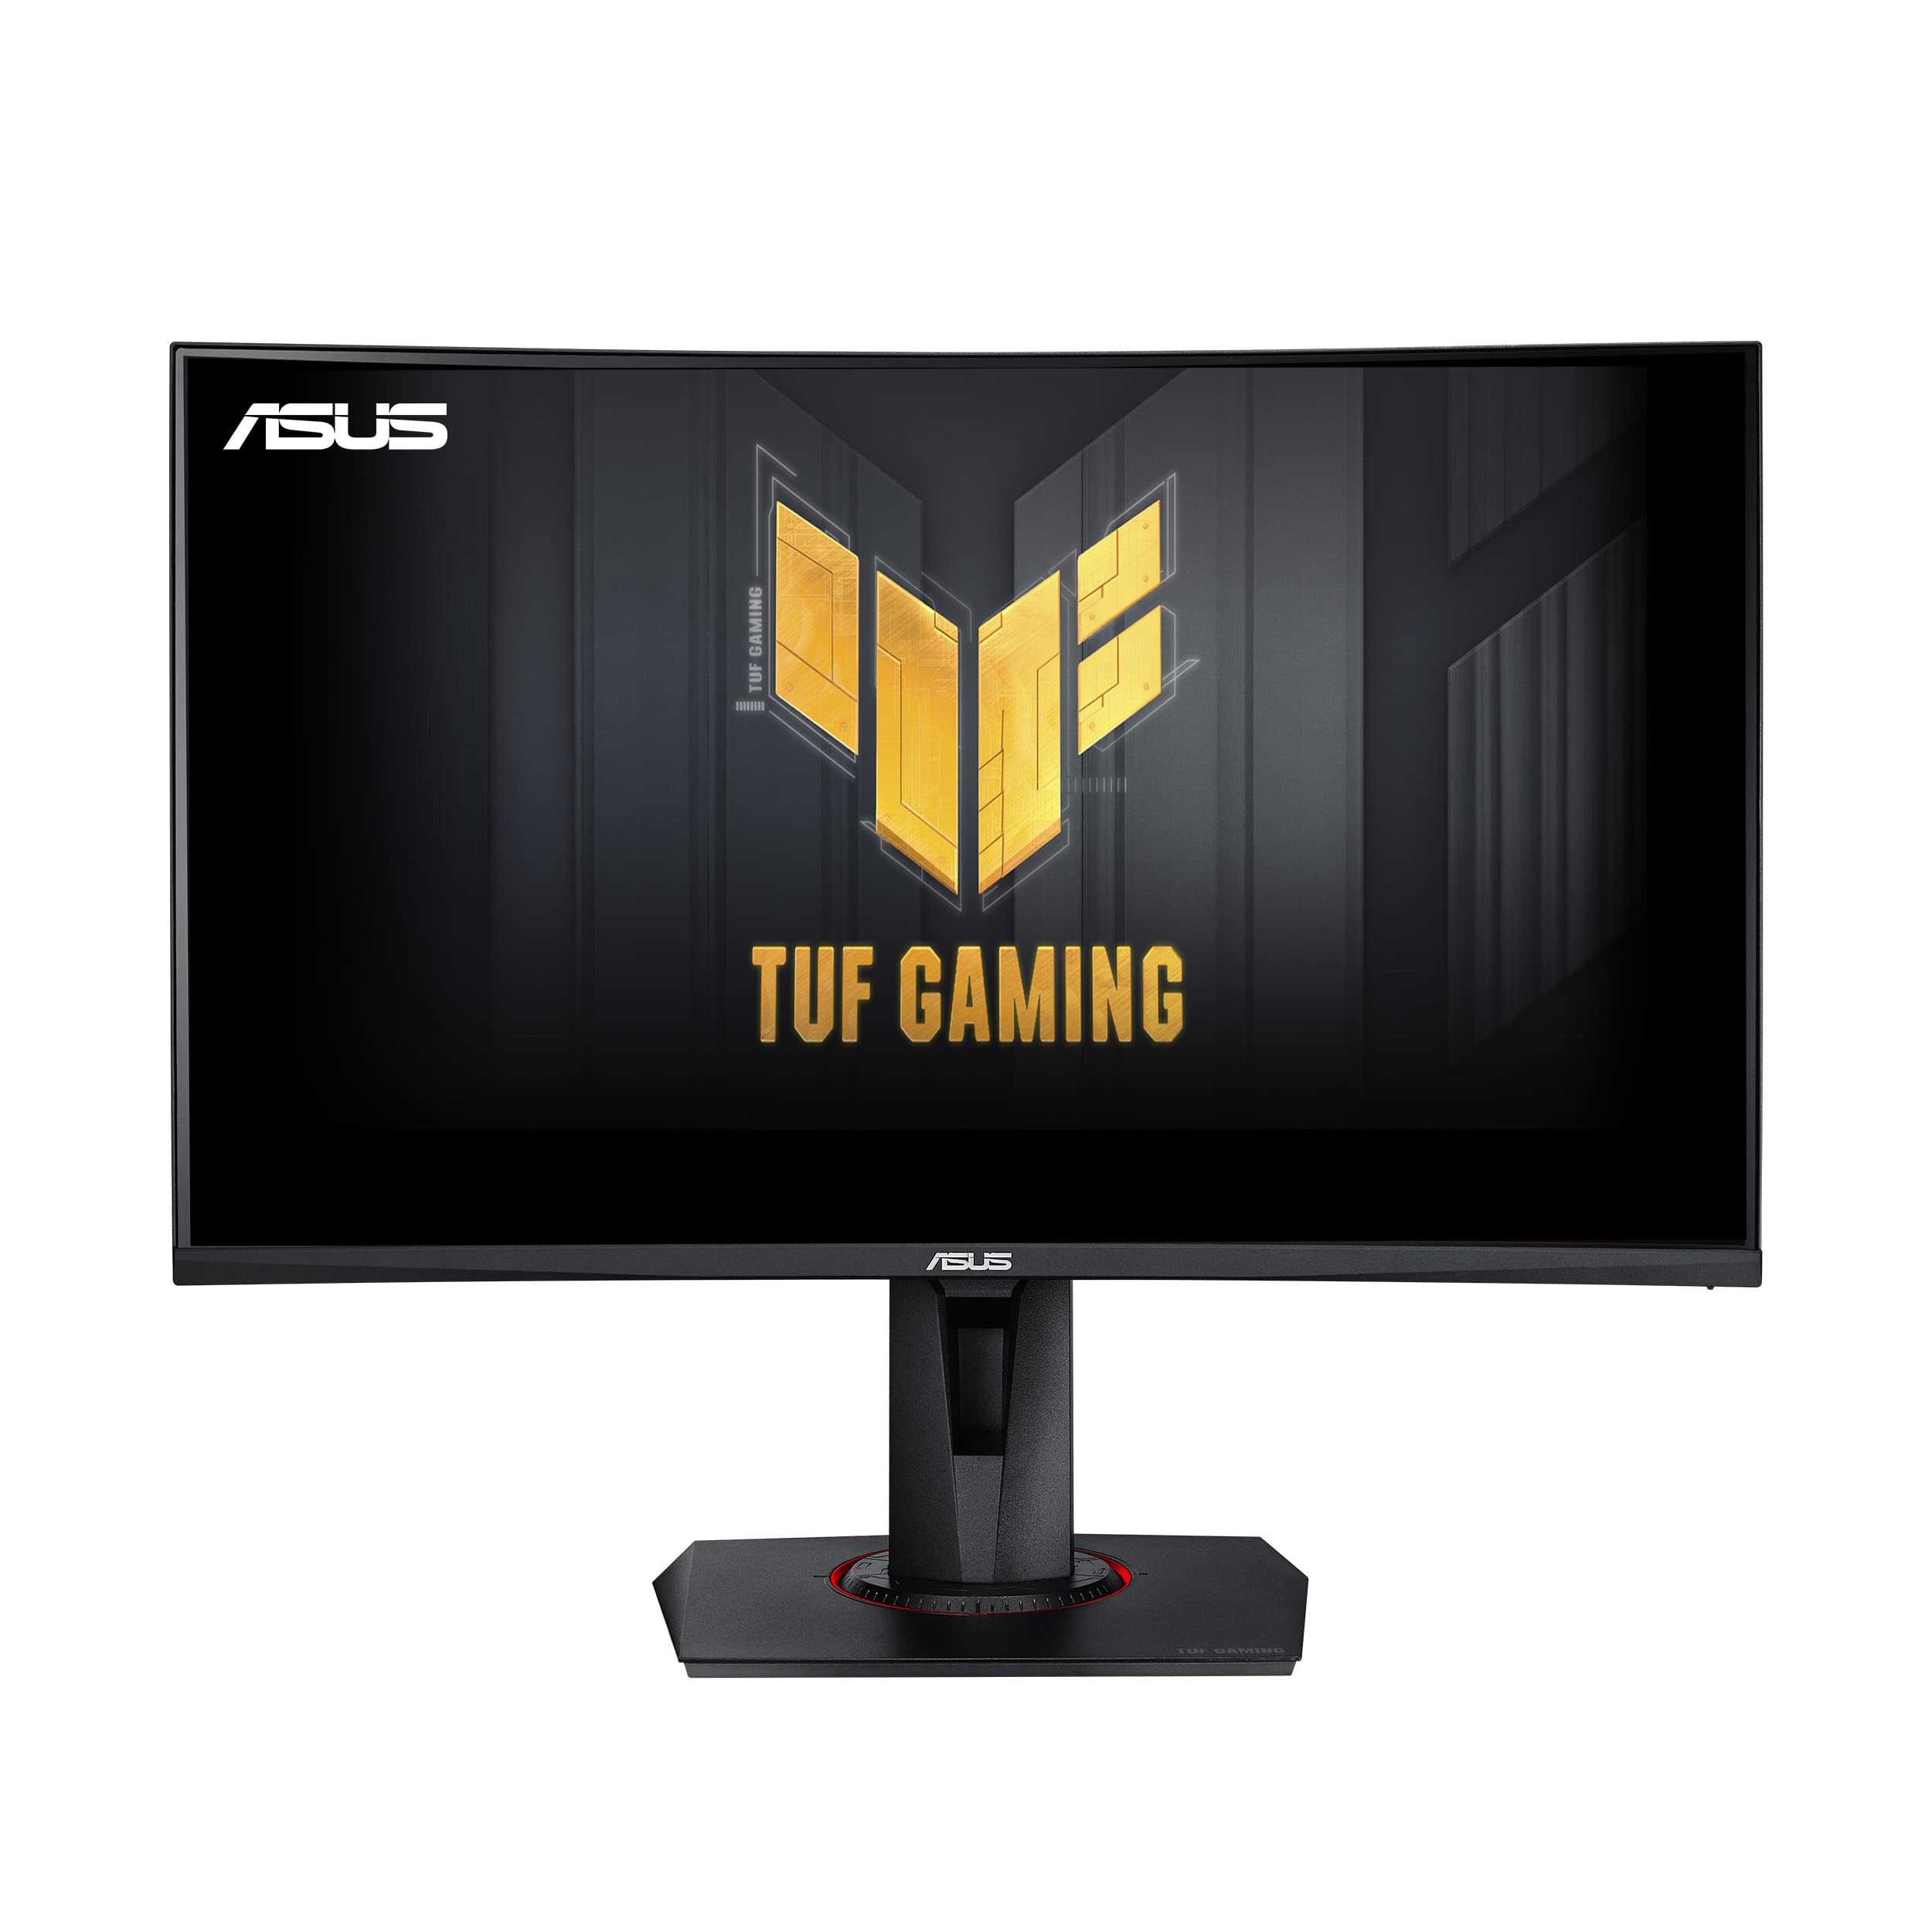  Asus 27” 1080P TUF Gaming Curved HDR Monitor (VG27VQM) - Full HD, 240Hz, 1ms, Extreme Low Motion Blur, Adaptive-Sync, Freesync™ Premium, Speakers, Eye Care, HDMI, DisplayPort, USB, Height Adjustable...